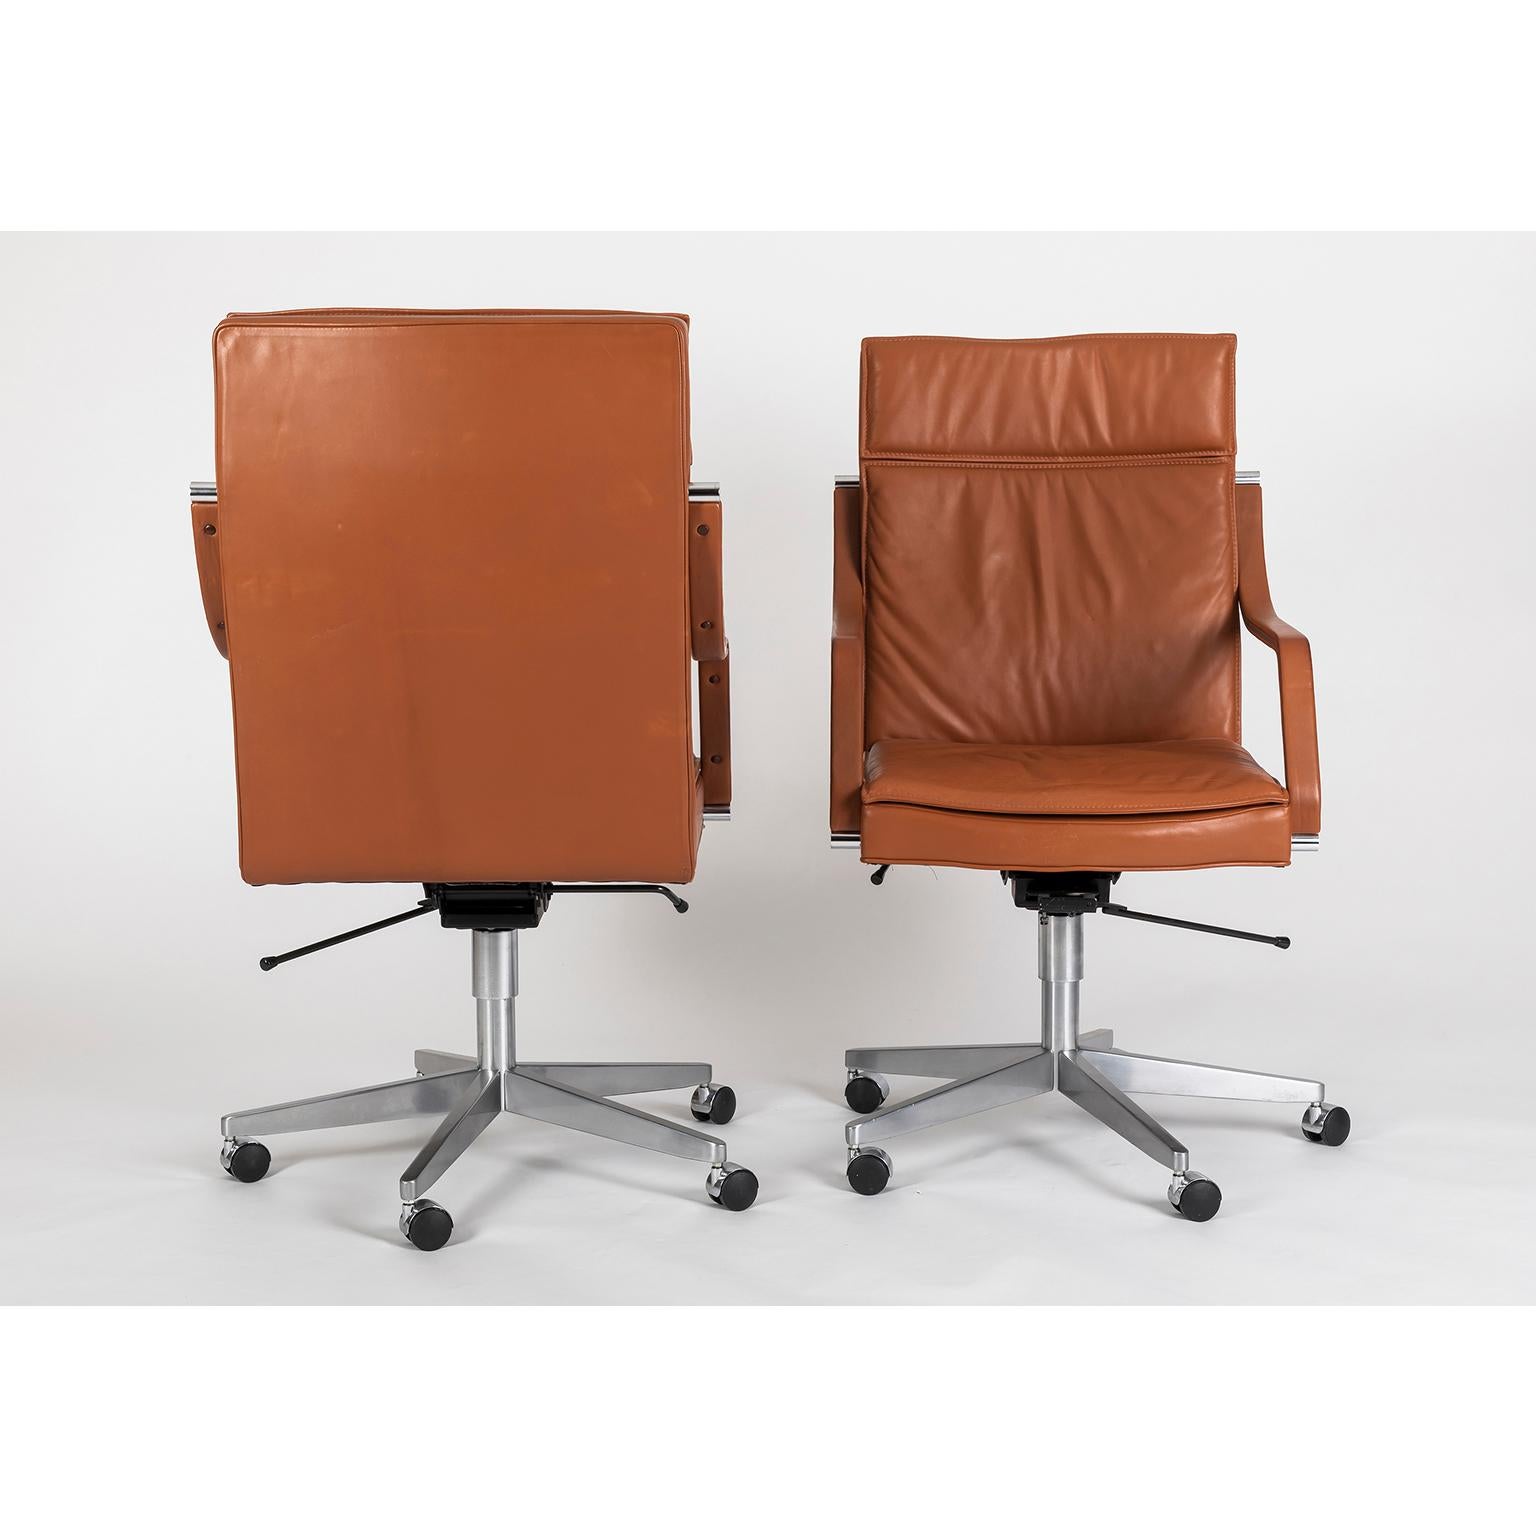 Beautiful and very confortable pair of office chairs by Geoffrey Hartcourt for Artifort. 

Original leather in a good vintage condition.

Measures: Width 60 cm; depth 67 cm; total height 102 cm; arm height 63 cm; seat height 44 cm